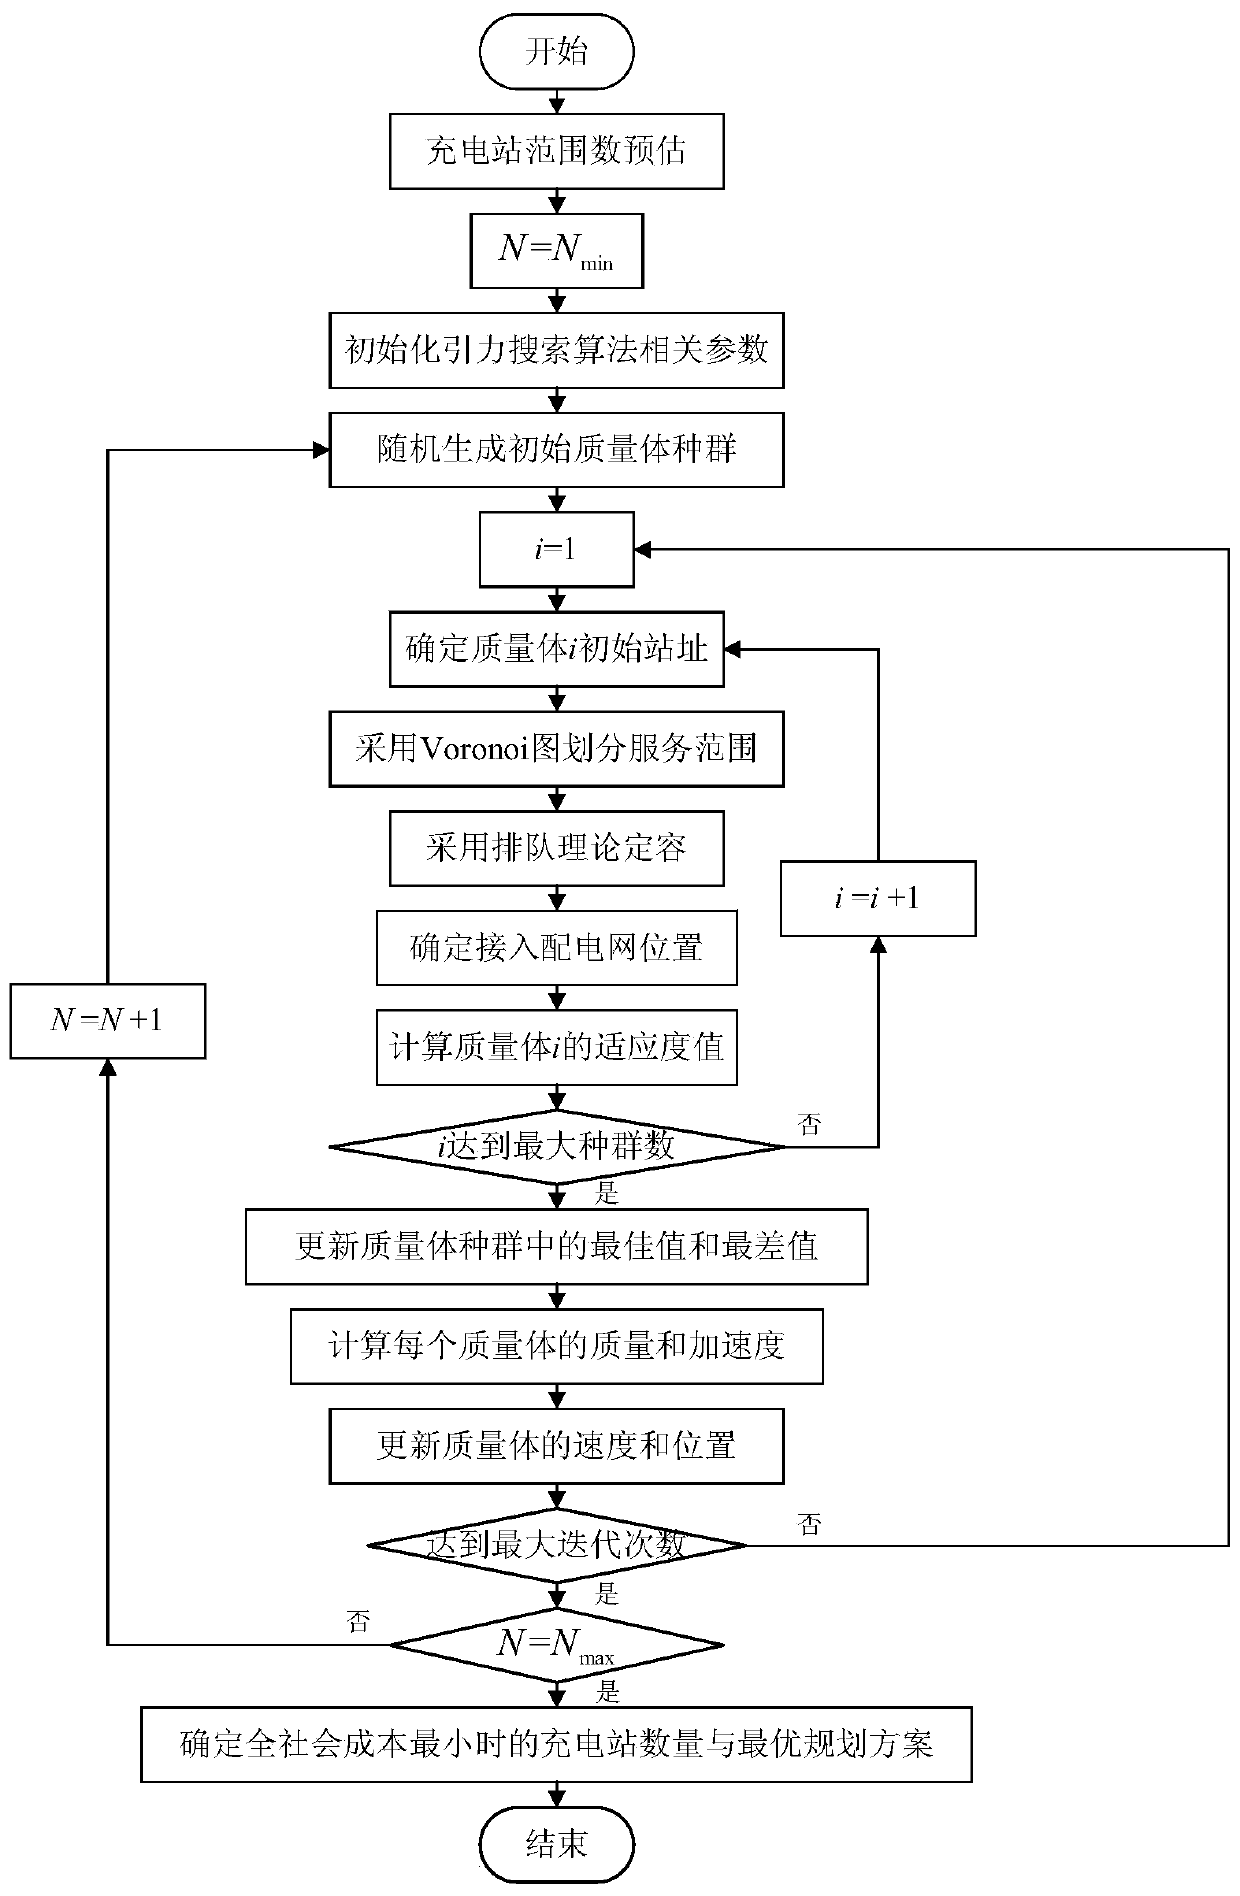 Electric vehicle charging station planning method based on gravitation search algorithm